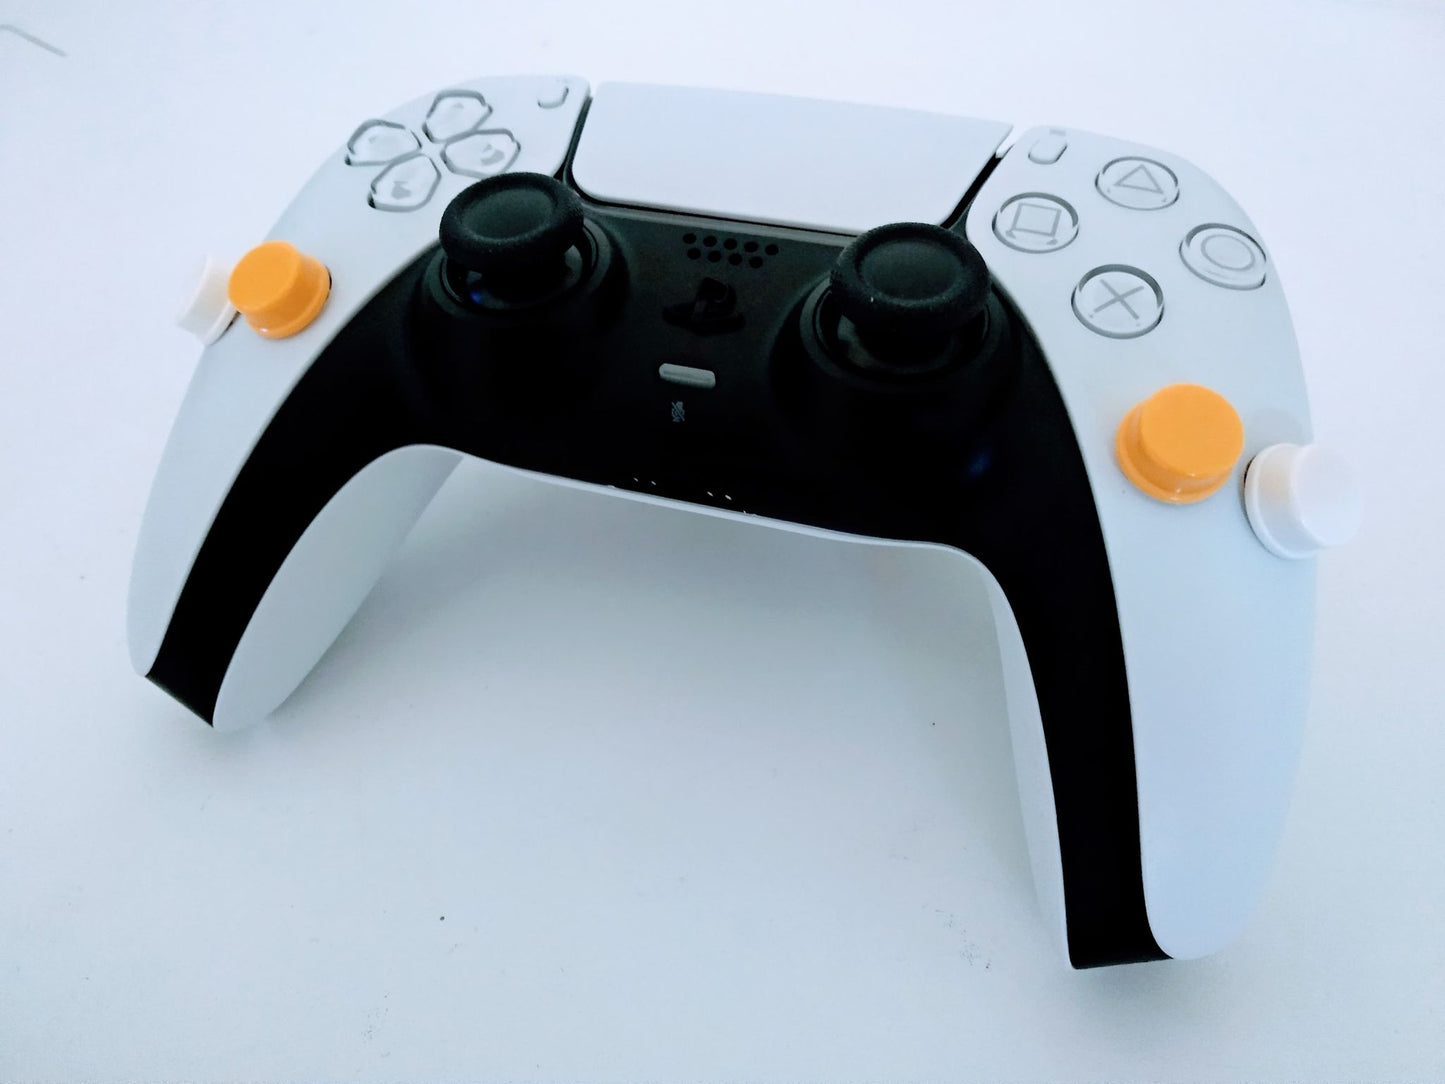 PS5 Dualsense controller with triggers on it